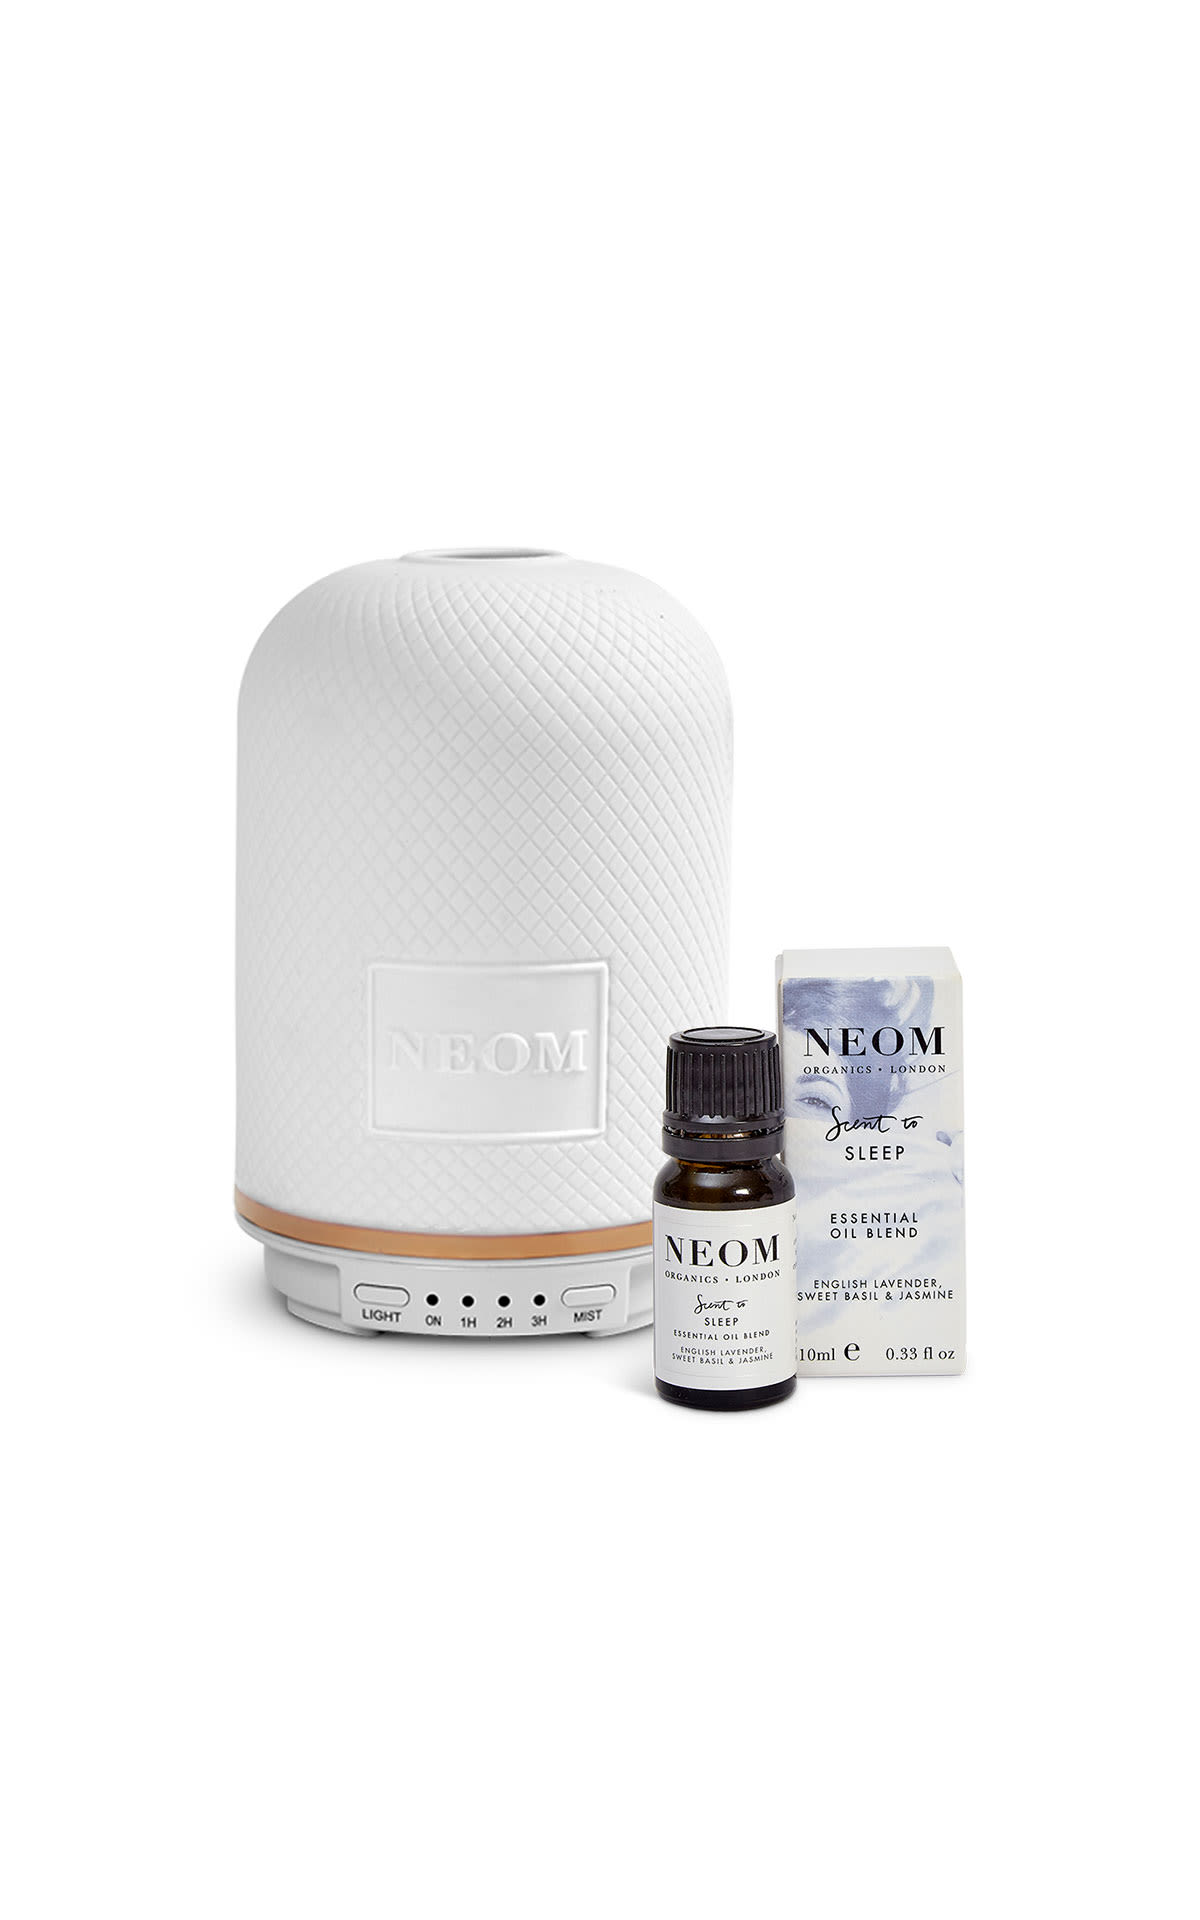 NEOM Pod oil and sleep from Bicester Village